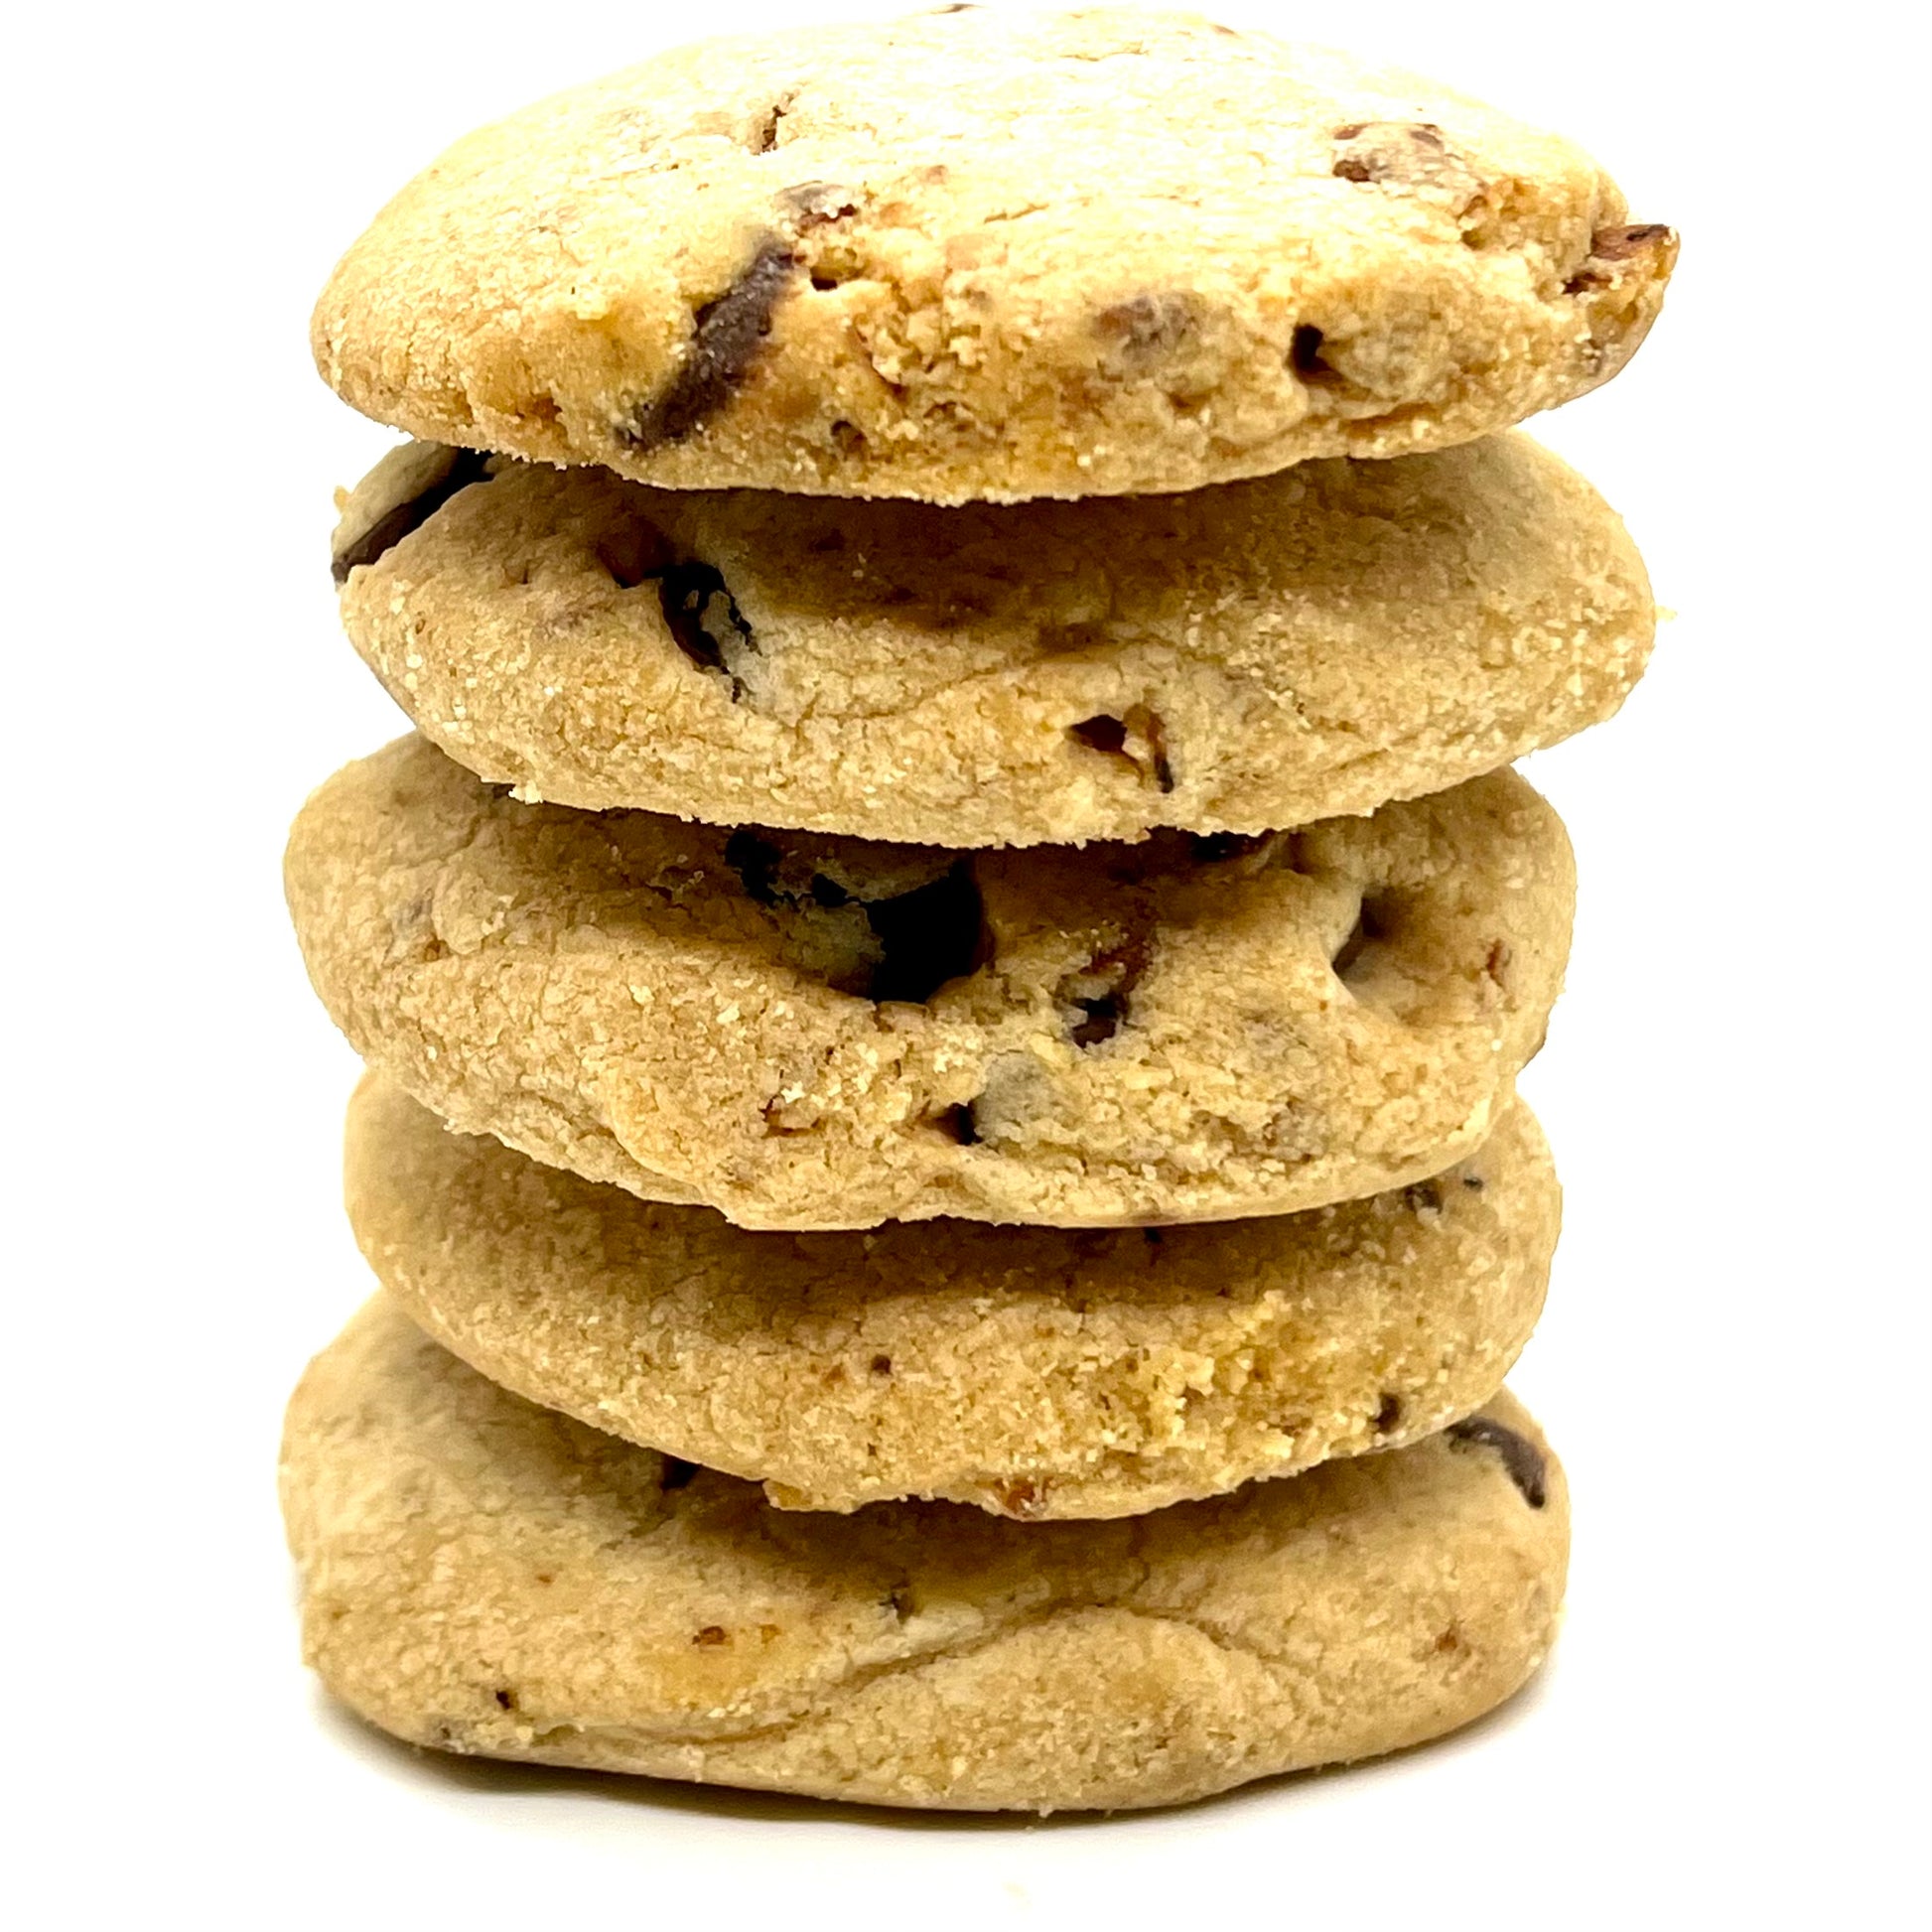 Chocolate Chip Arare Cookies - Wholesale Unlimited Inc.